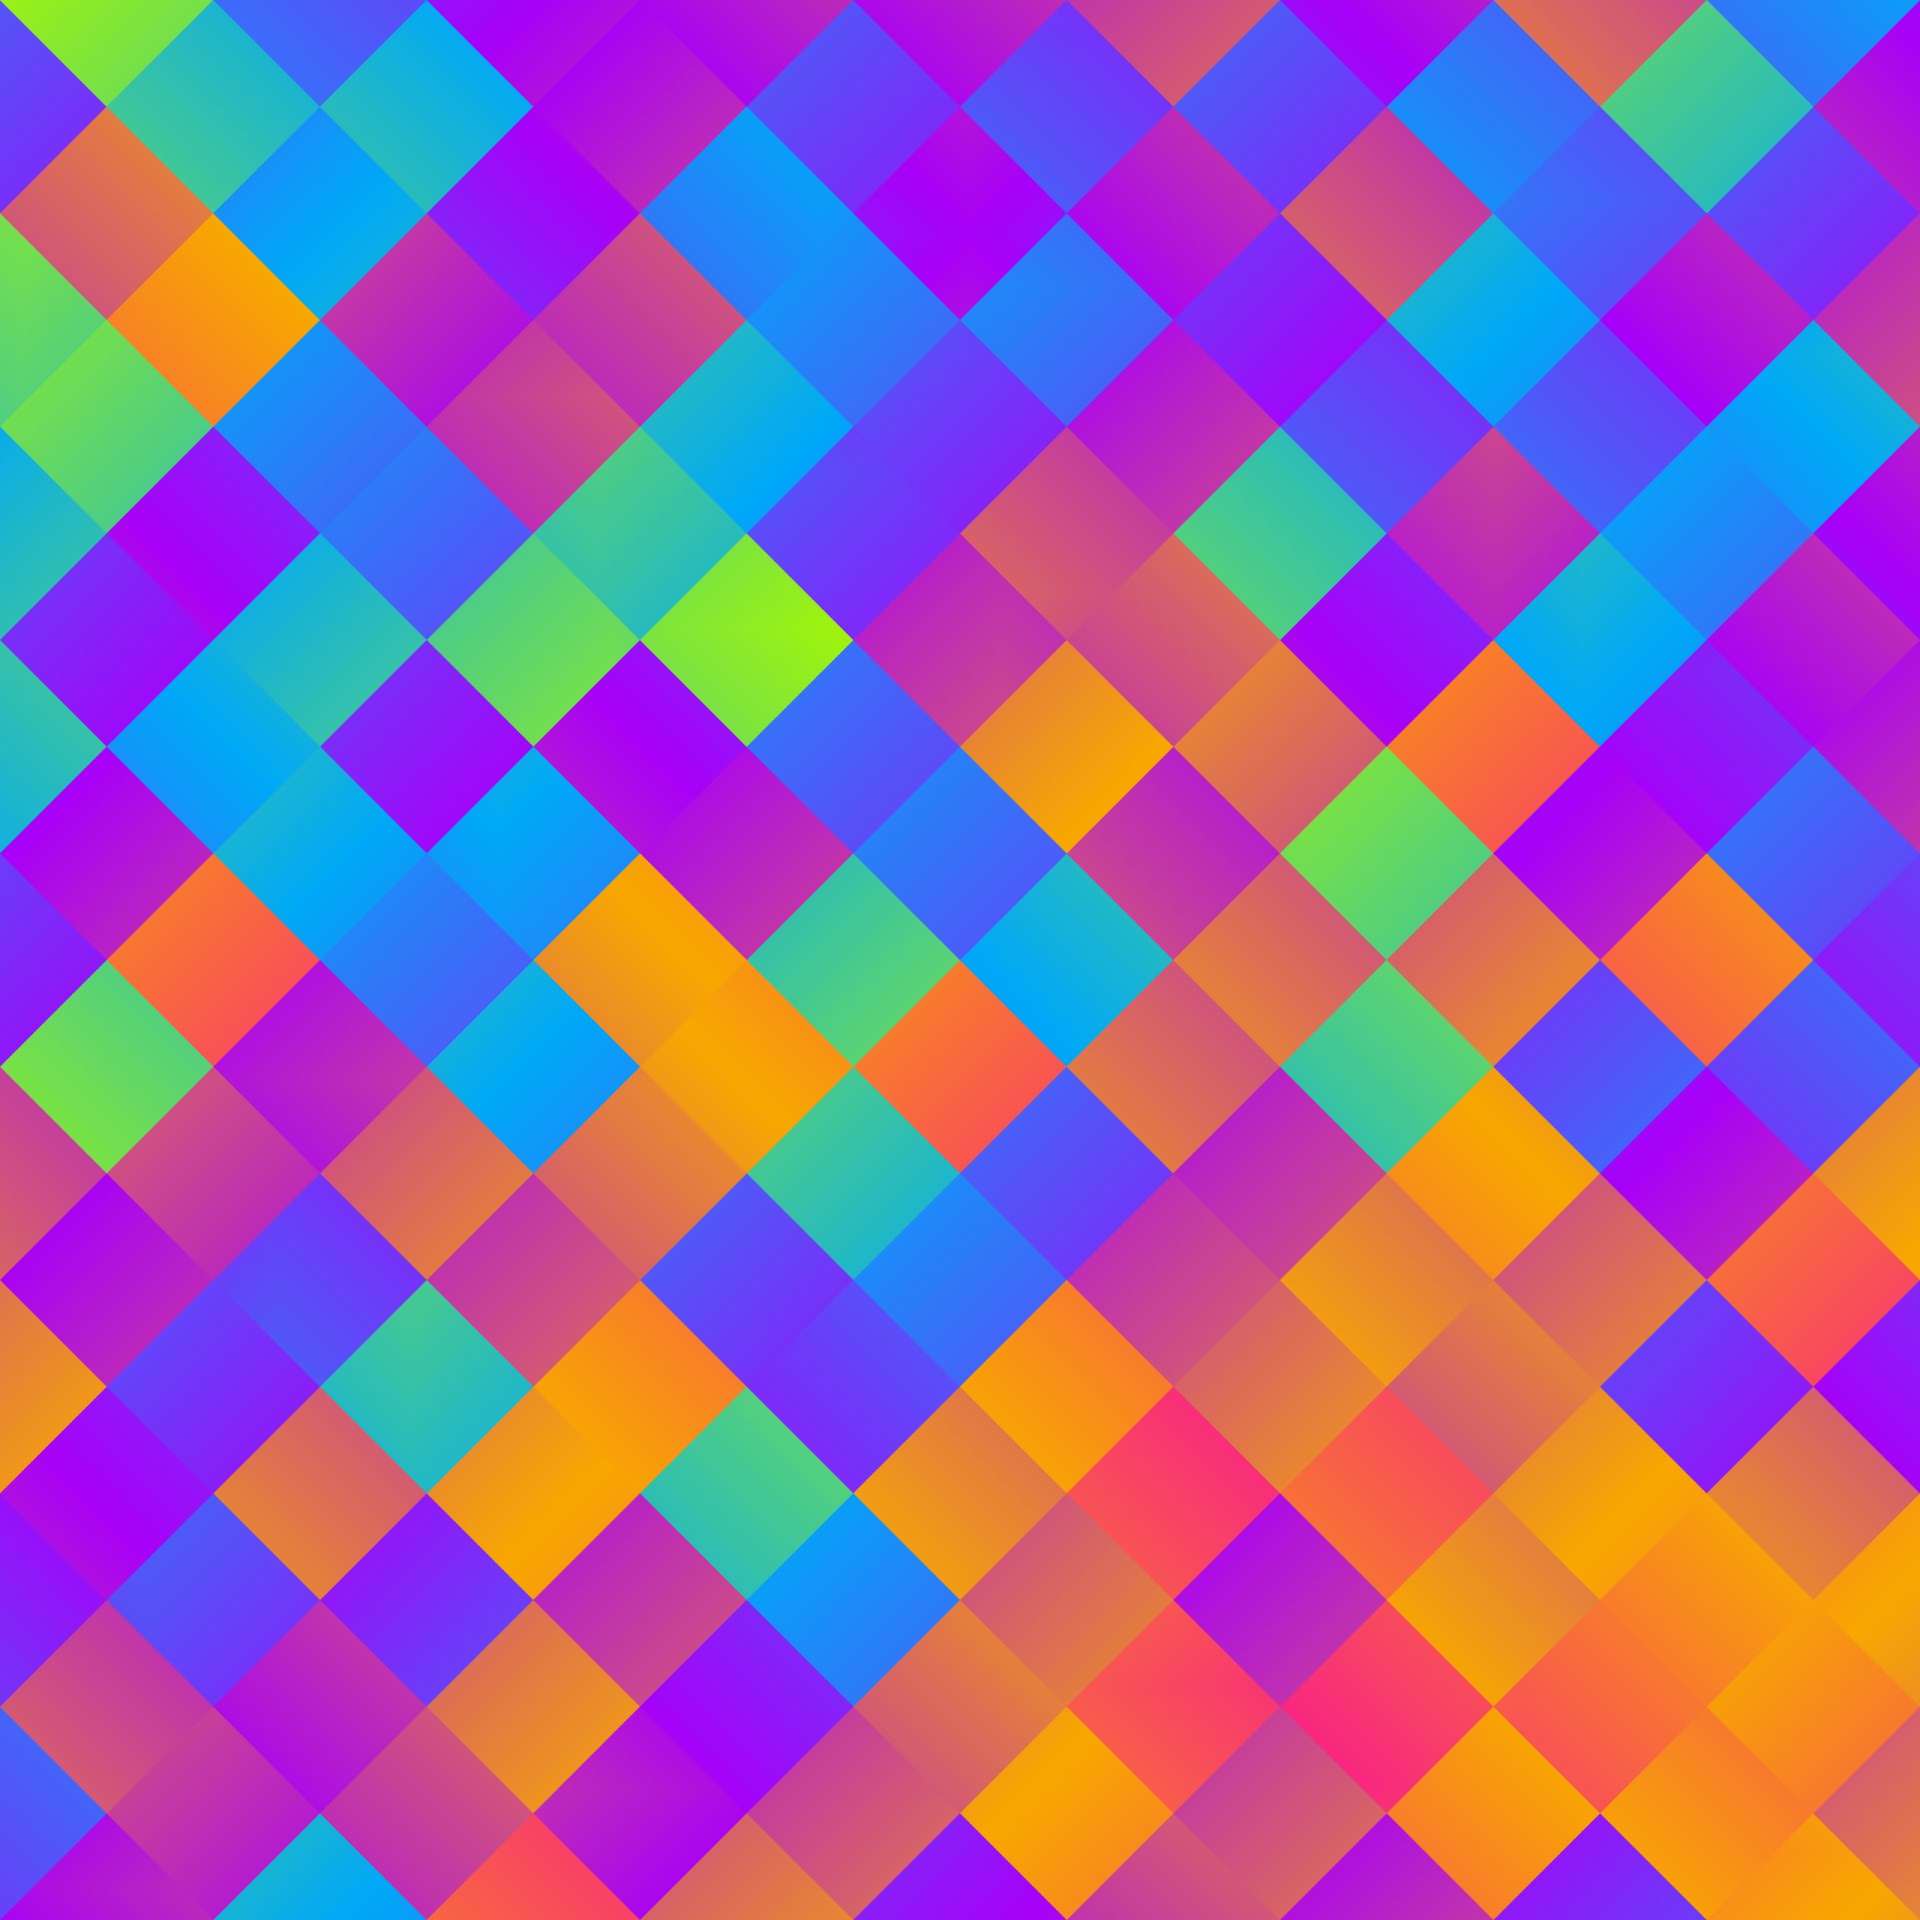 Cubes background pattern colorful rainbow colors